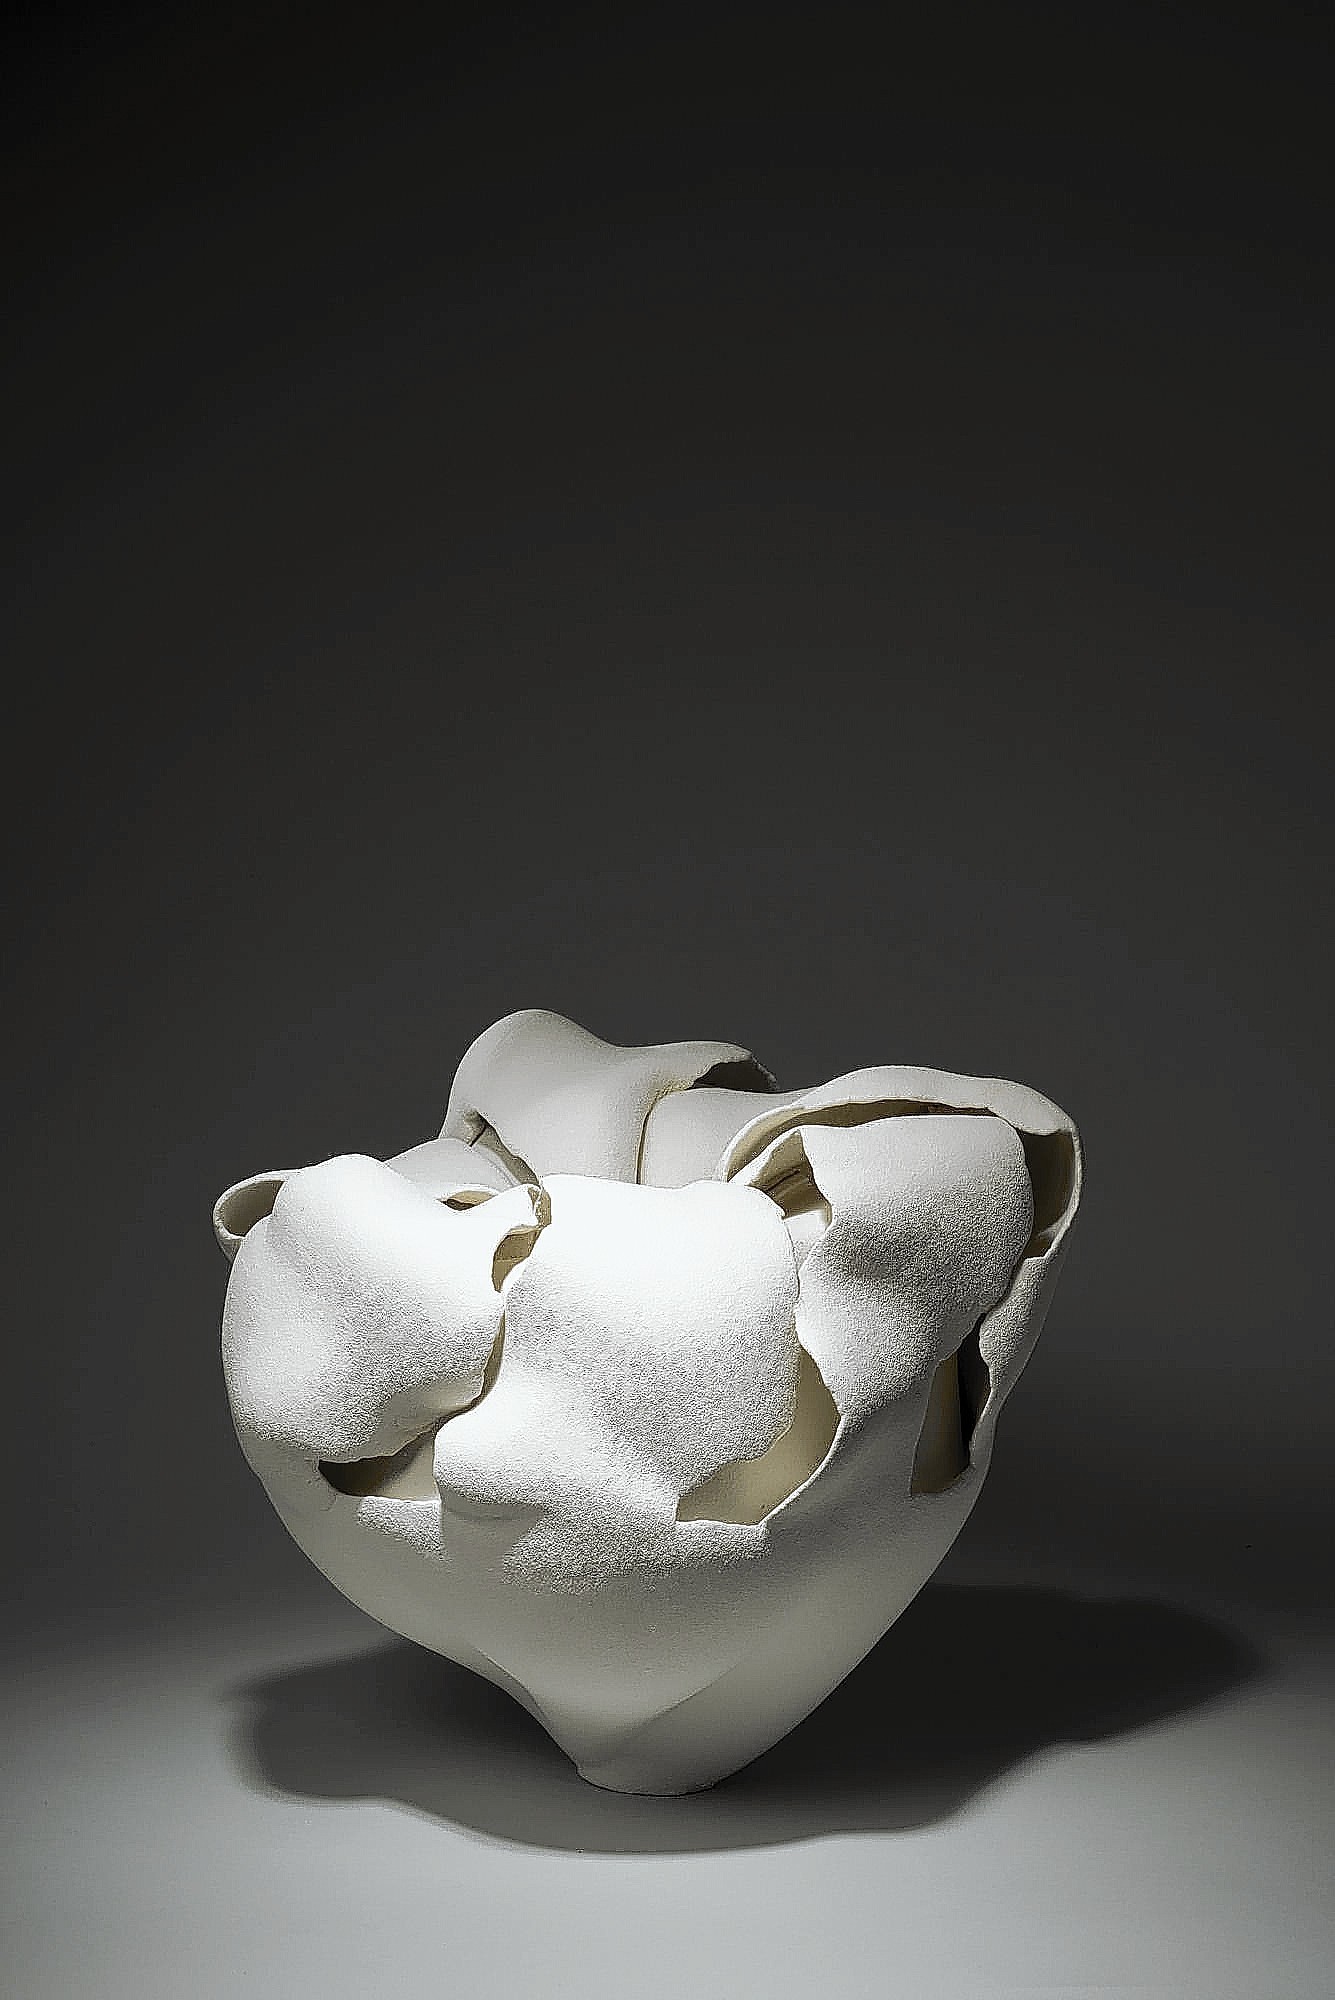 Exhibit of contemporary Japanese ceramics opens at the 